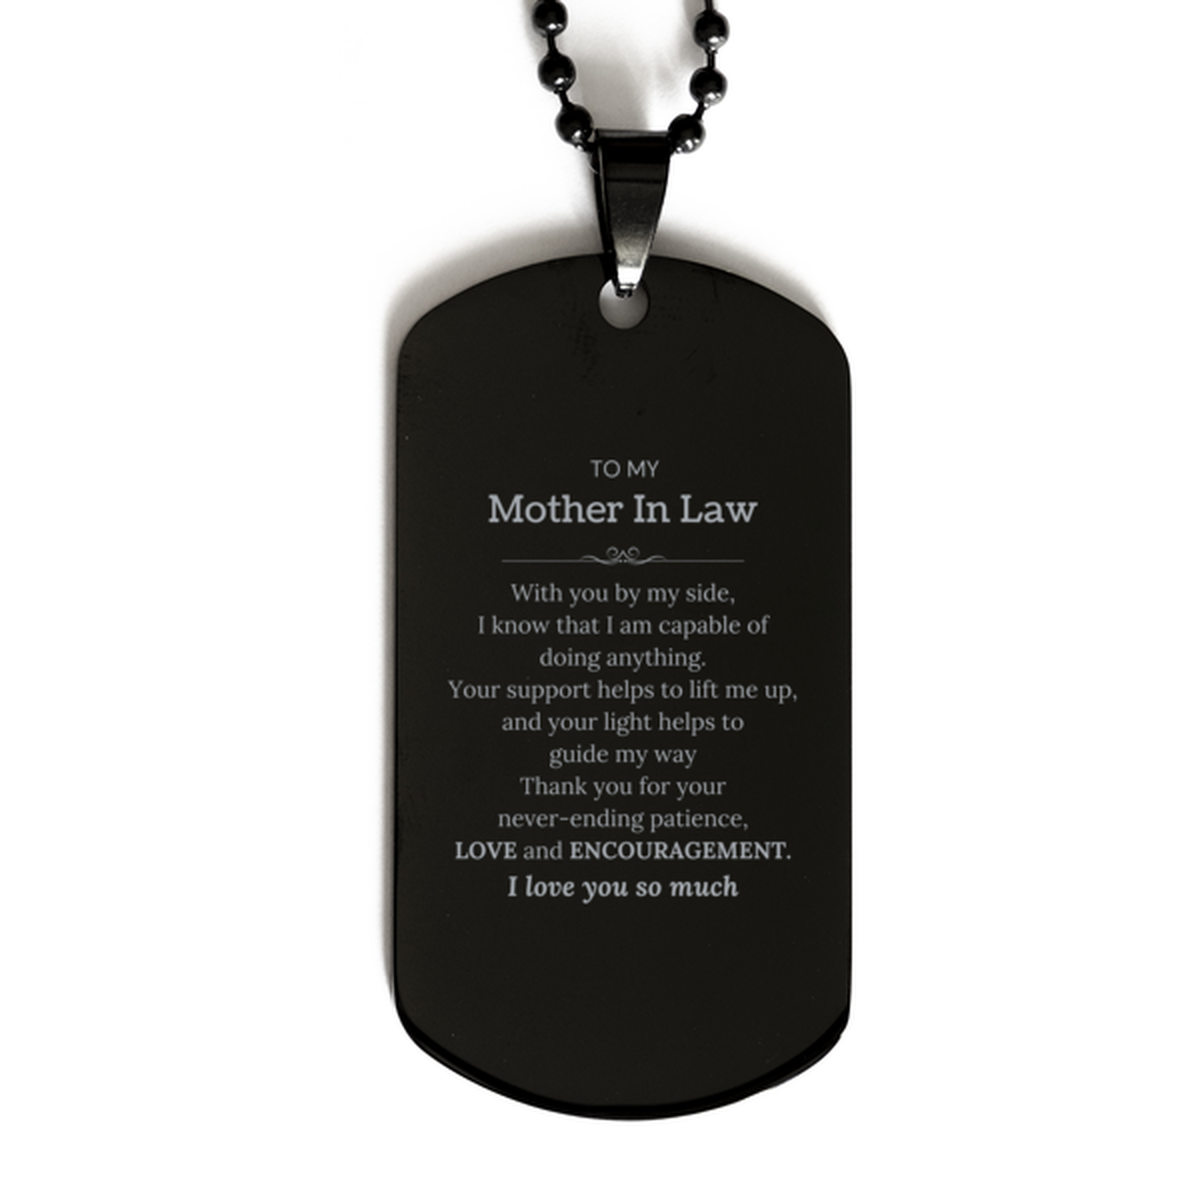 Appreciation Mother In Law Black Dog Tag Gifts, To My Mother In Law Birthday Christmas Wedding Keepsake Gifts for Mother In Law With you by my side, I know that I am capable of doing anything. I love you so much